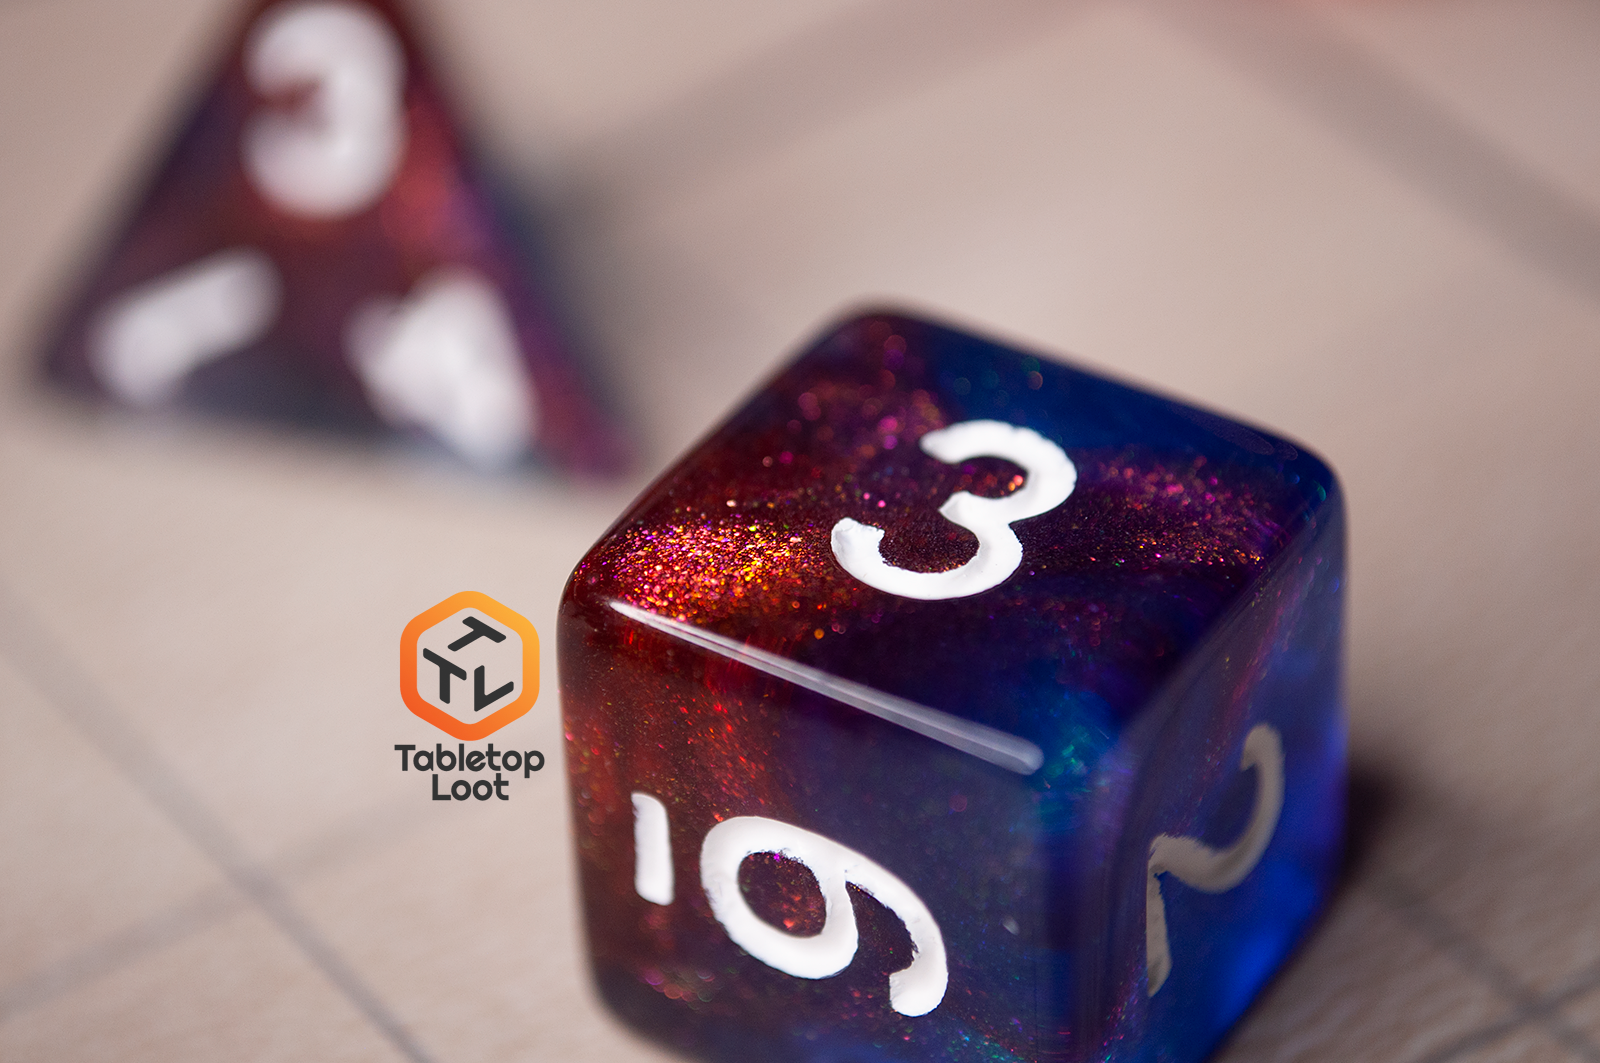 A close up of the D6 from the Interstellar 7 piece dice set from Tabletop Loot with swirling shades of shimmery red and blue resin and white numbering.